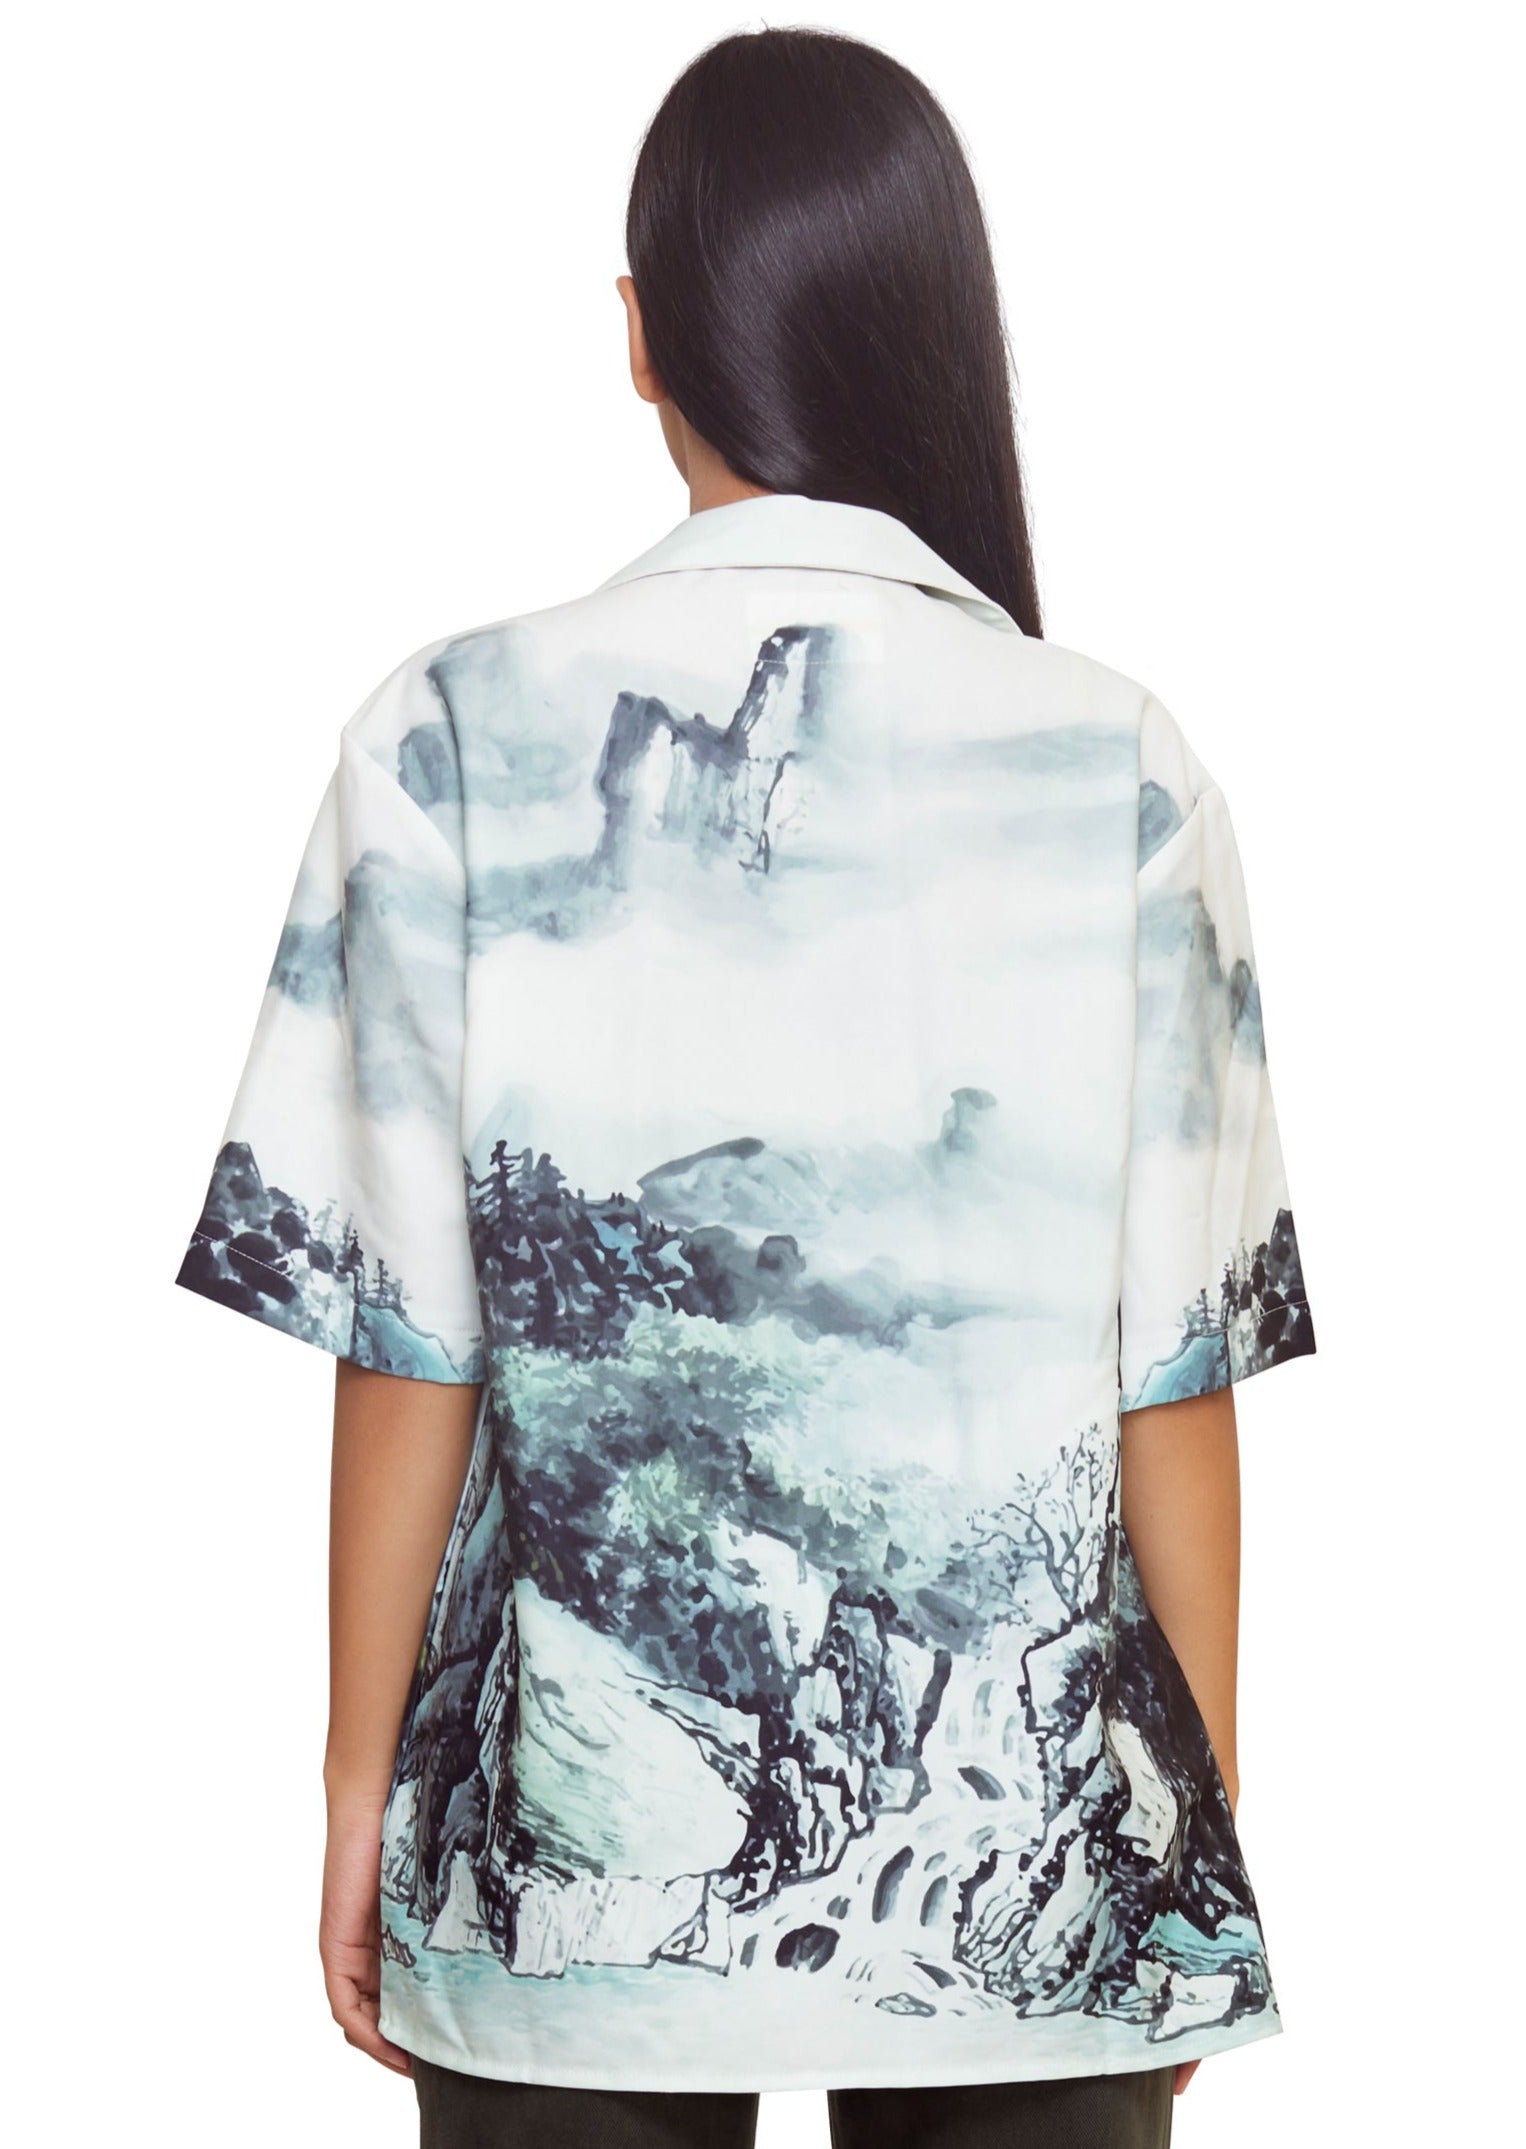 Blue and White Landscape Water Paint Short Sleeve button up shirt from the brand Yitai